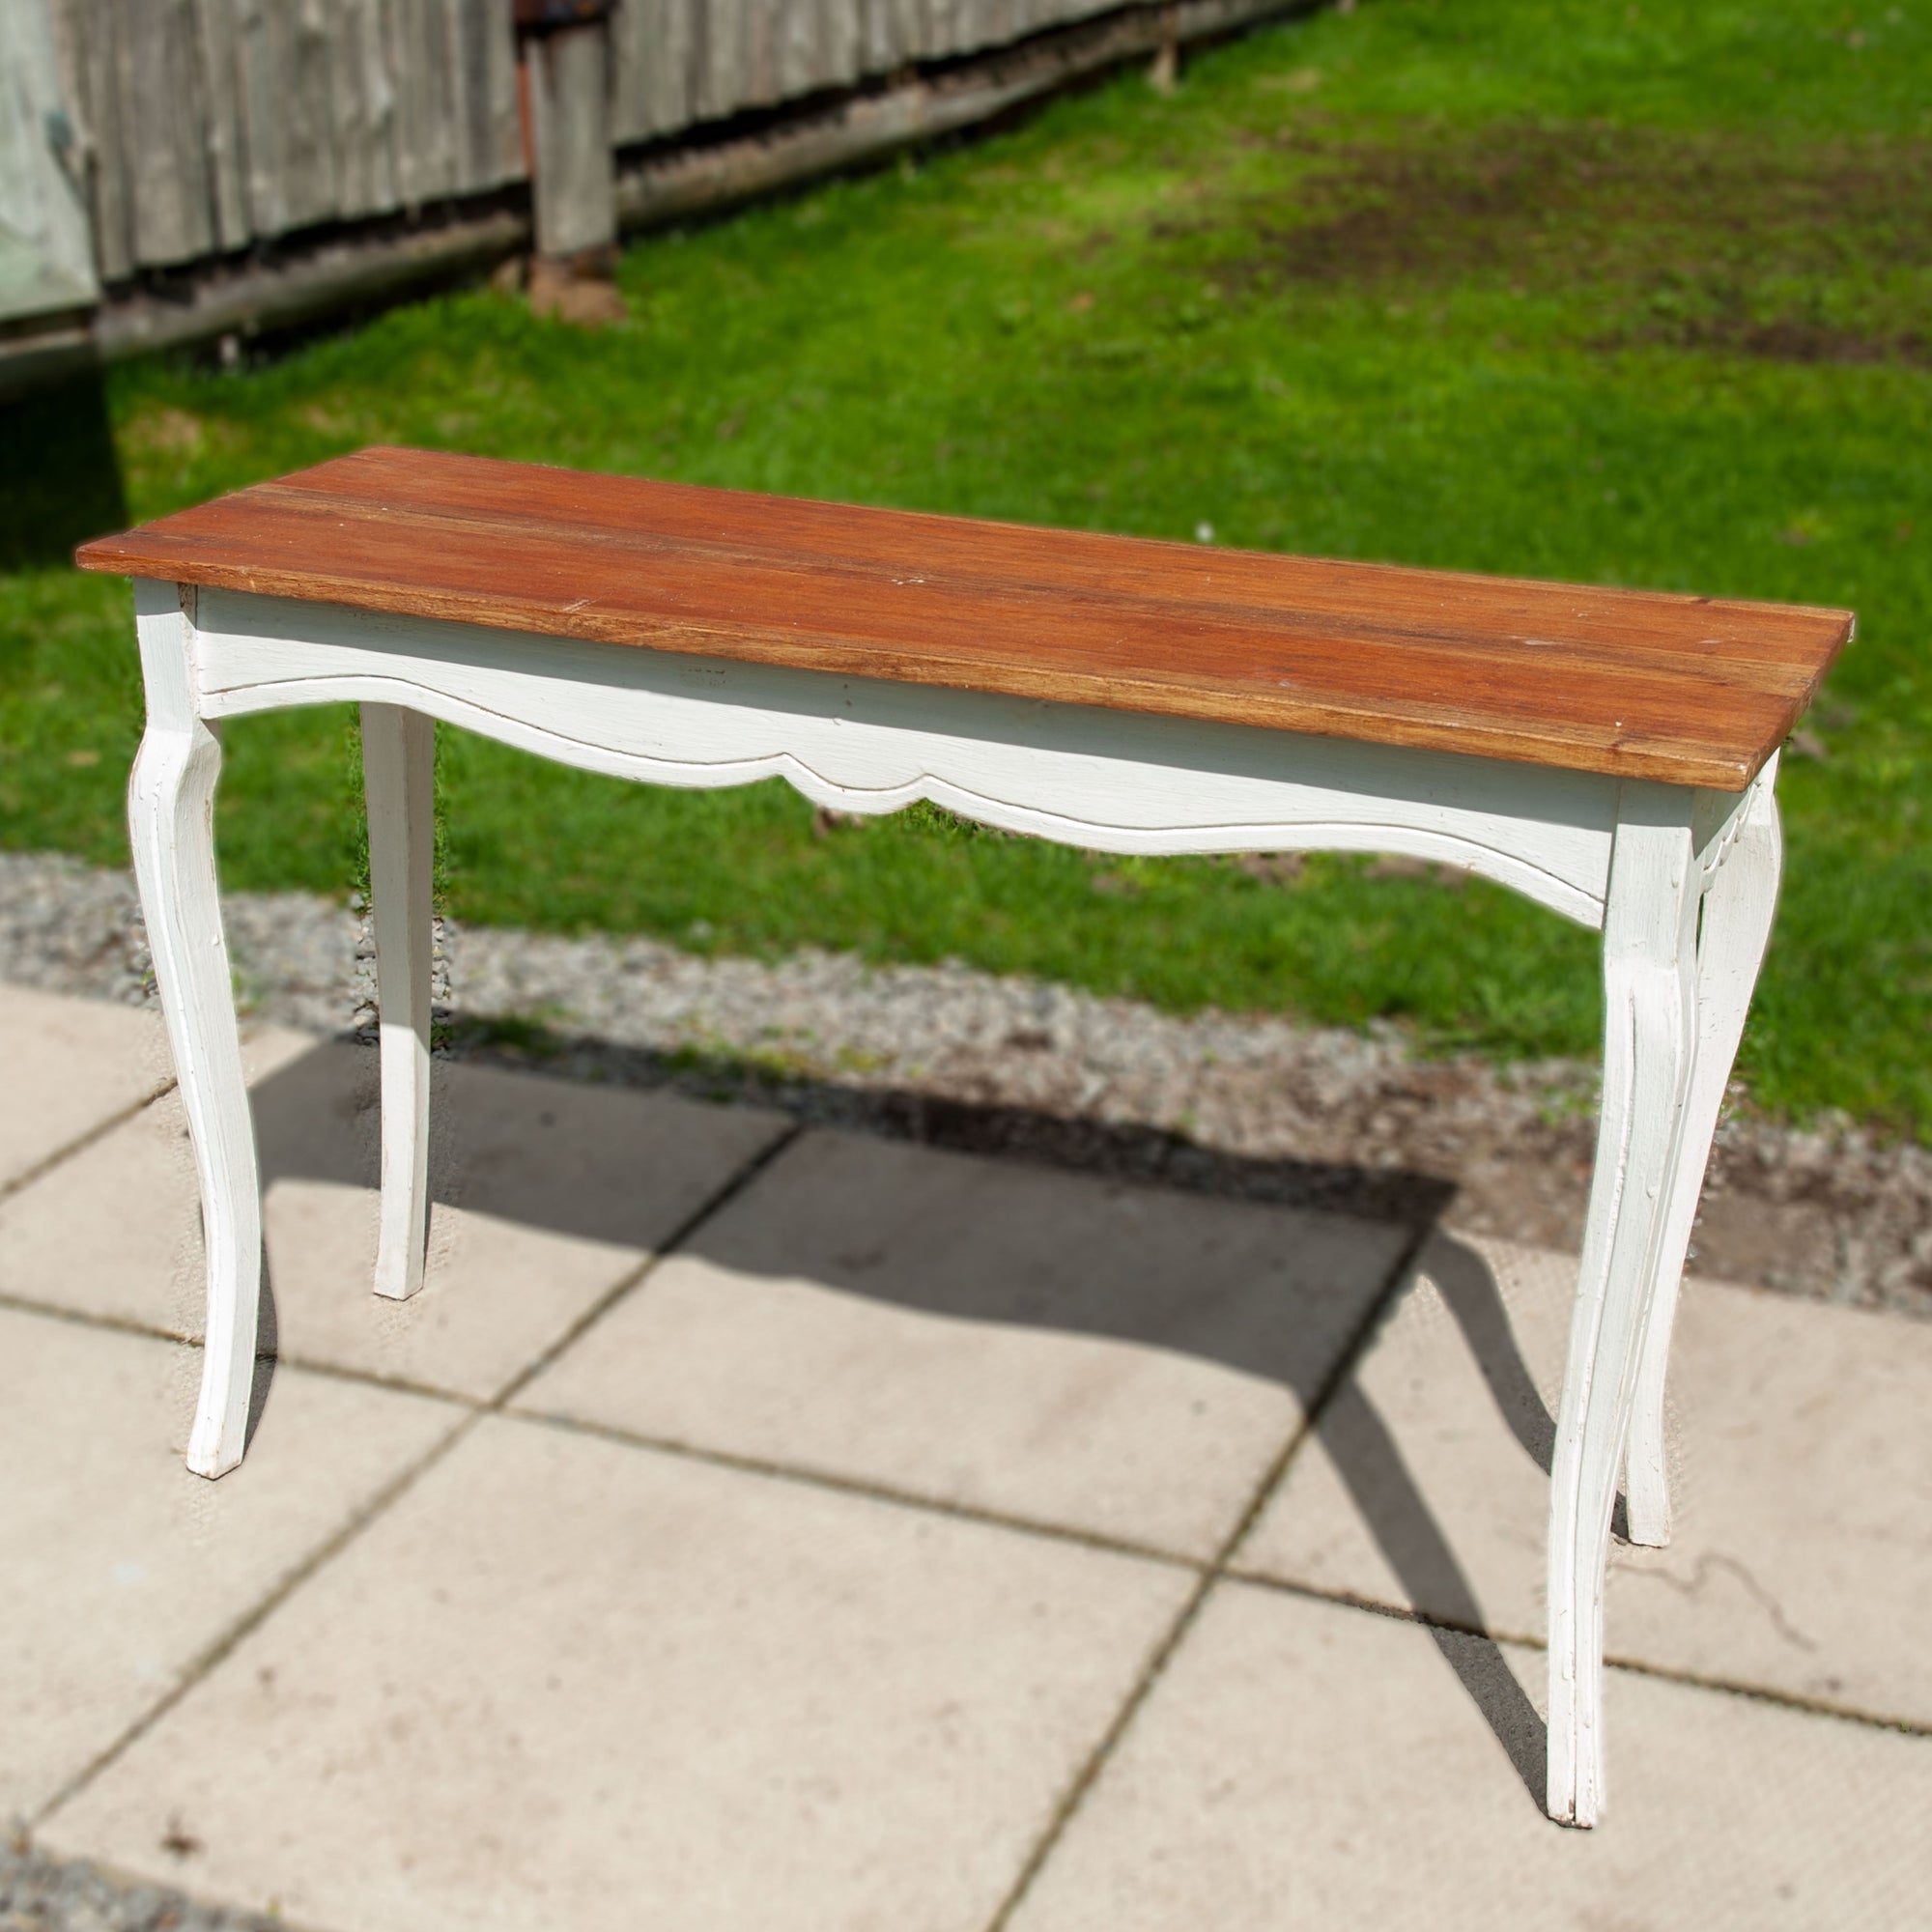 A rustic hallway table with wooden bike and white painted legs